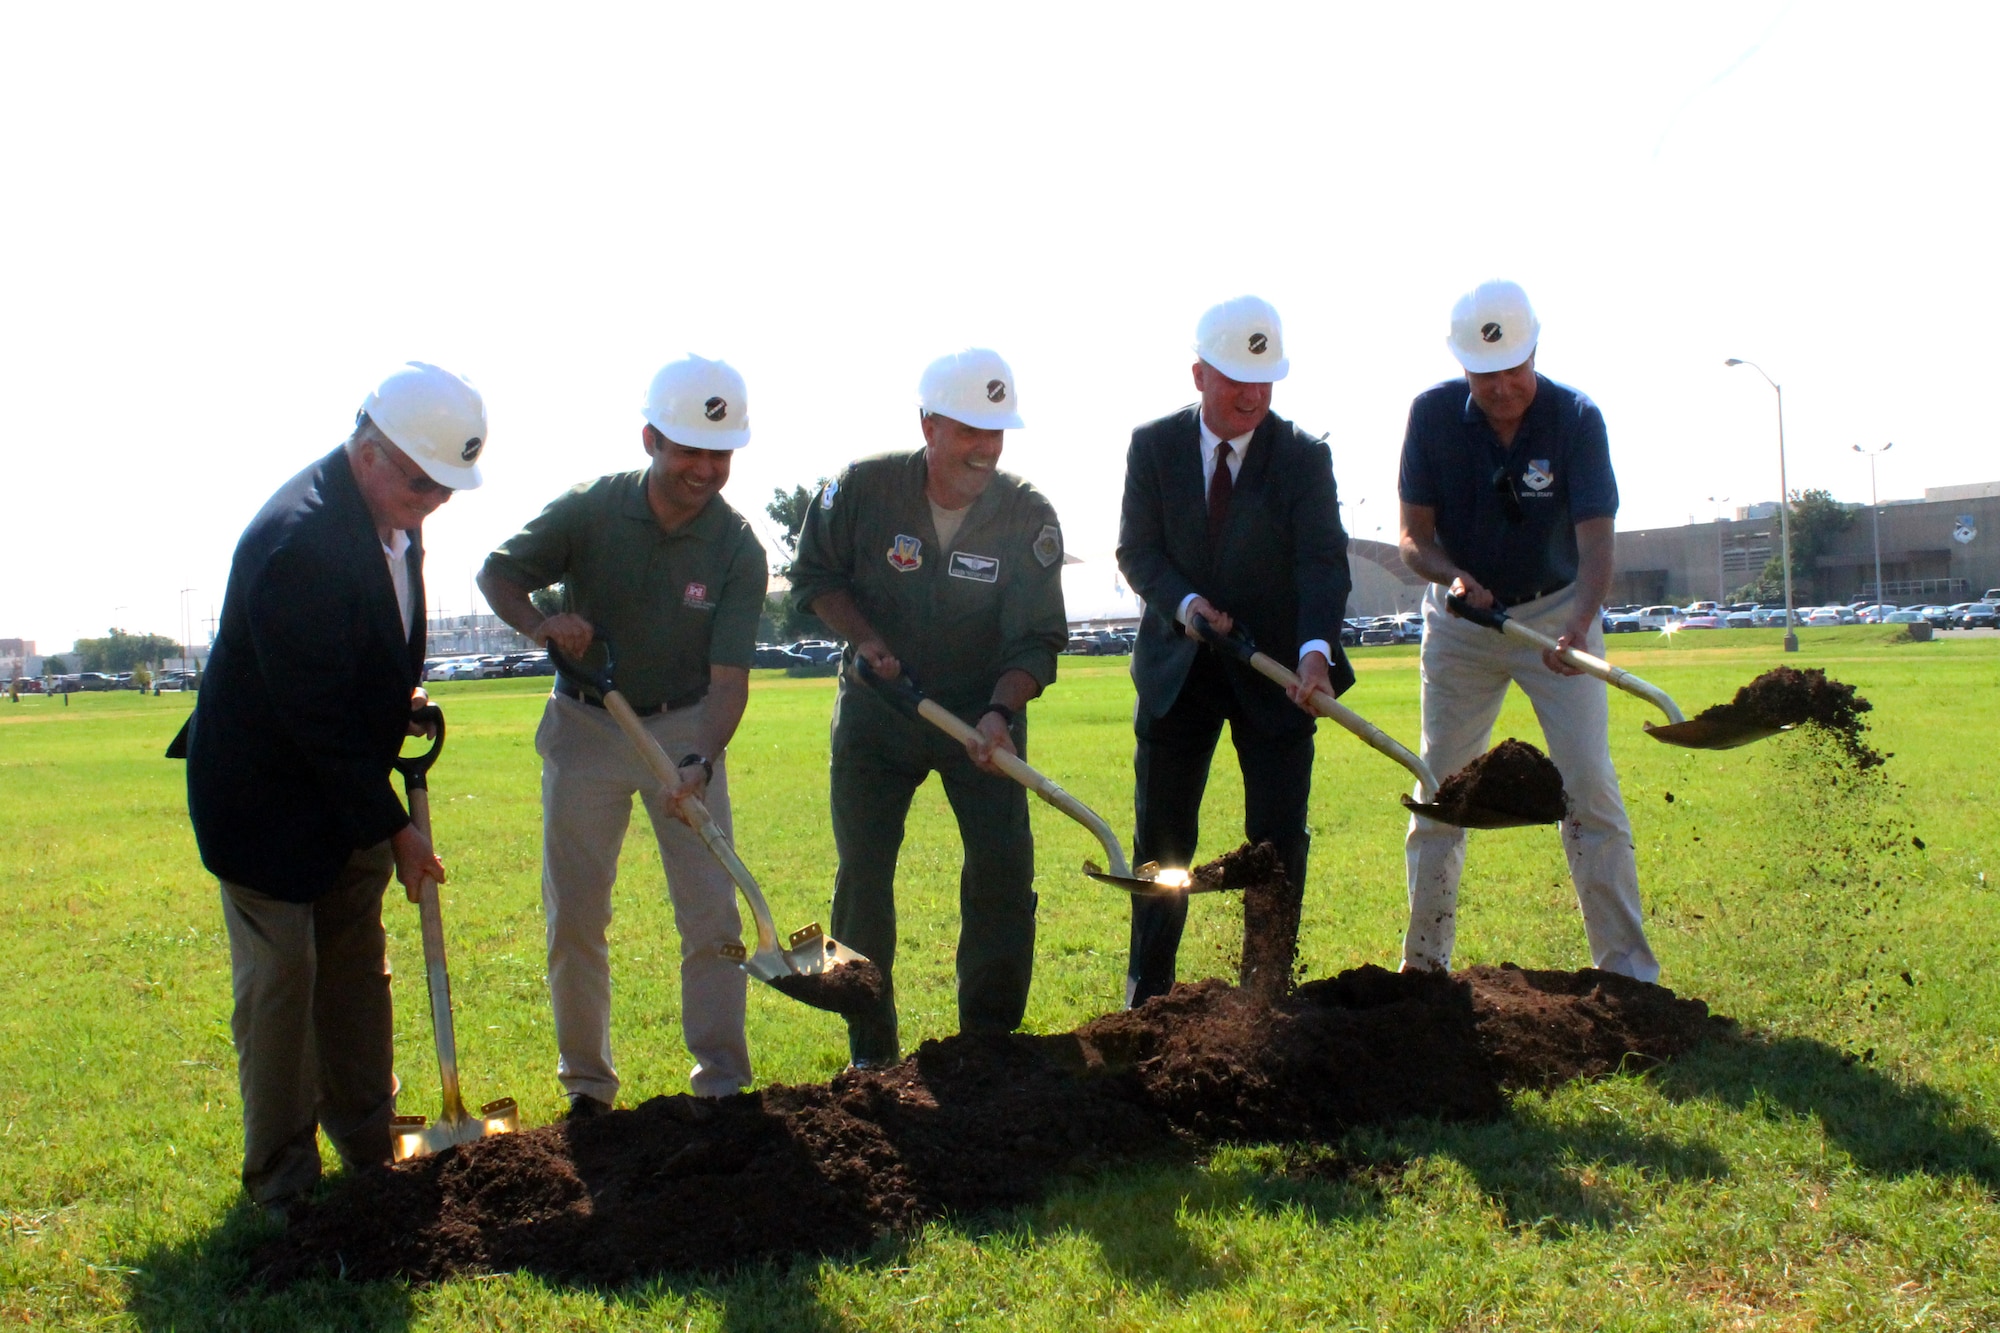 Members of the 552nd Air Control Wing leadership, civil engineering, and the U.S. Army Corps of Engineers celebrate the groundbreaking of an E-3 Sentry Consolidated Simulator Building at Tinker Air Force Base on August 16, 2019. This new building will house the E-3 DRAGON Flight Deck Sims, E-3 Mission sims, and Command and Reporting Center mission sims. (U.S. Air Force photo by 2nd Lt. Ashlyn K. Paulson)